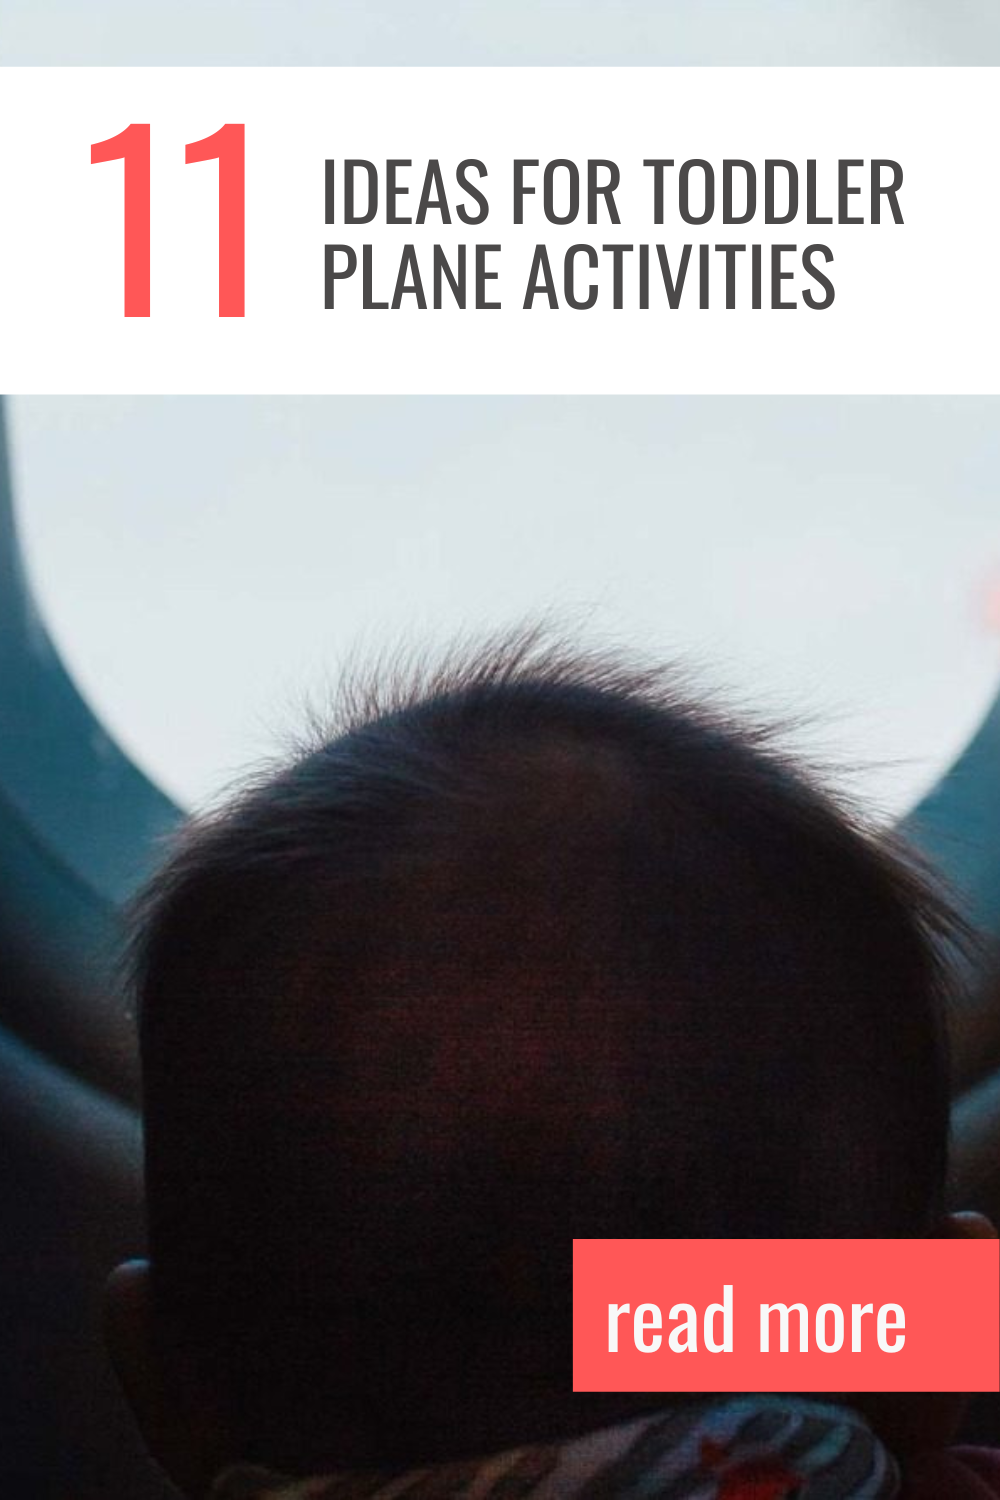 15 Easy and Entertaining Airplane Activities for Toddlers » Simply